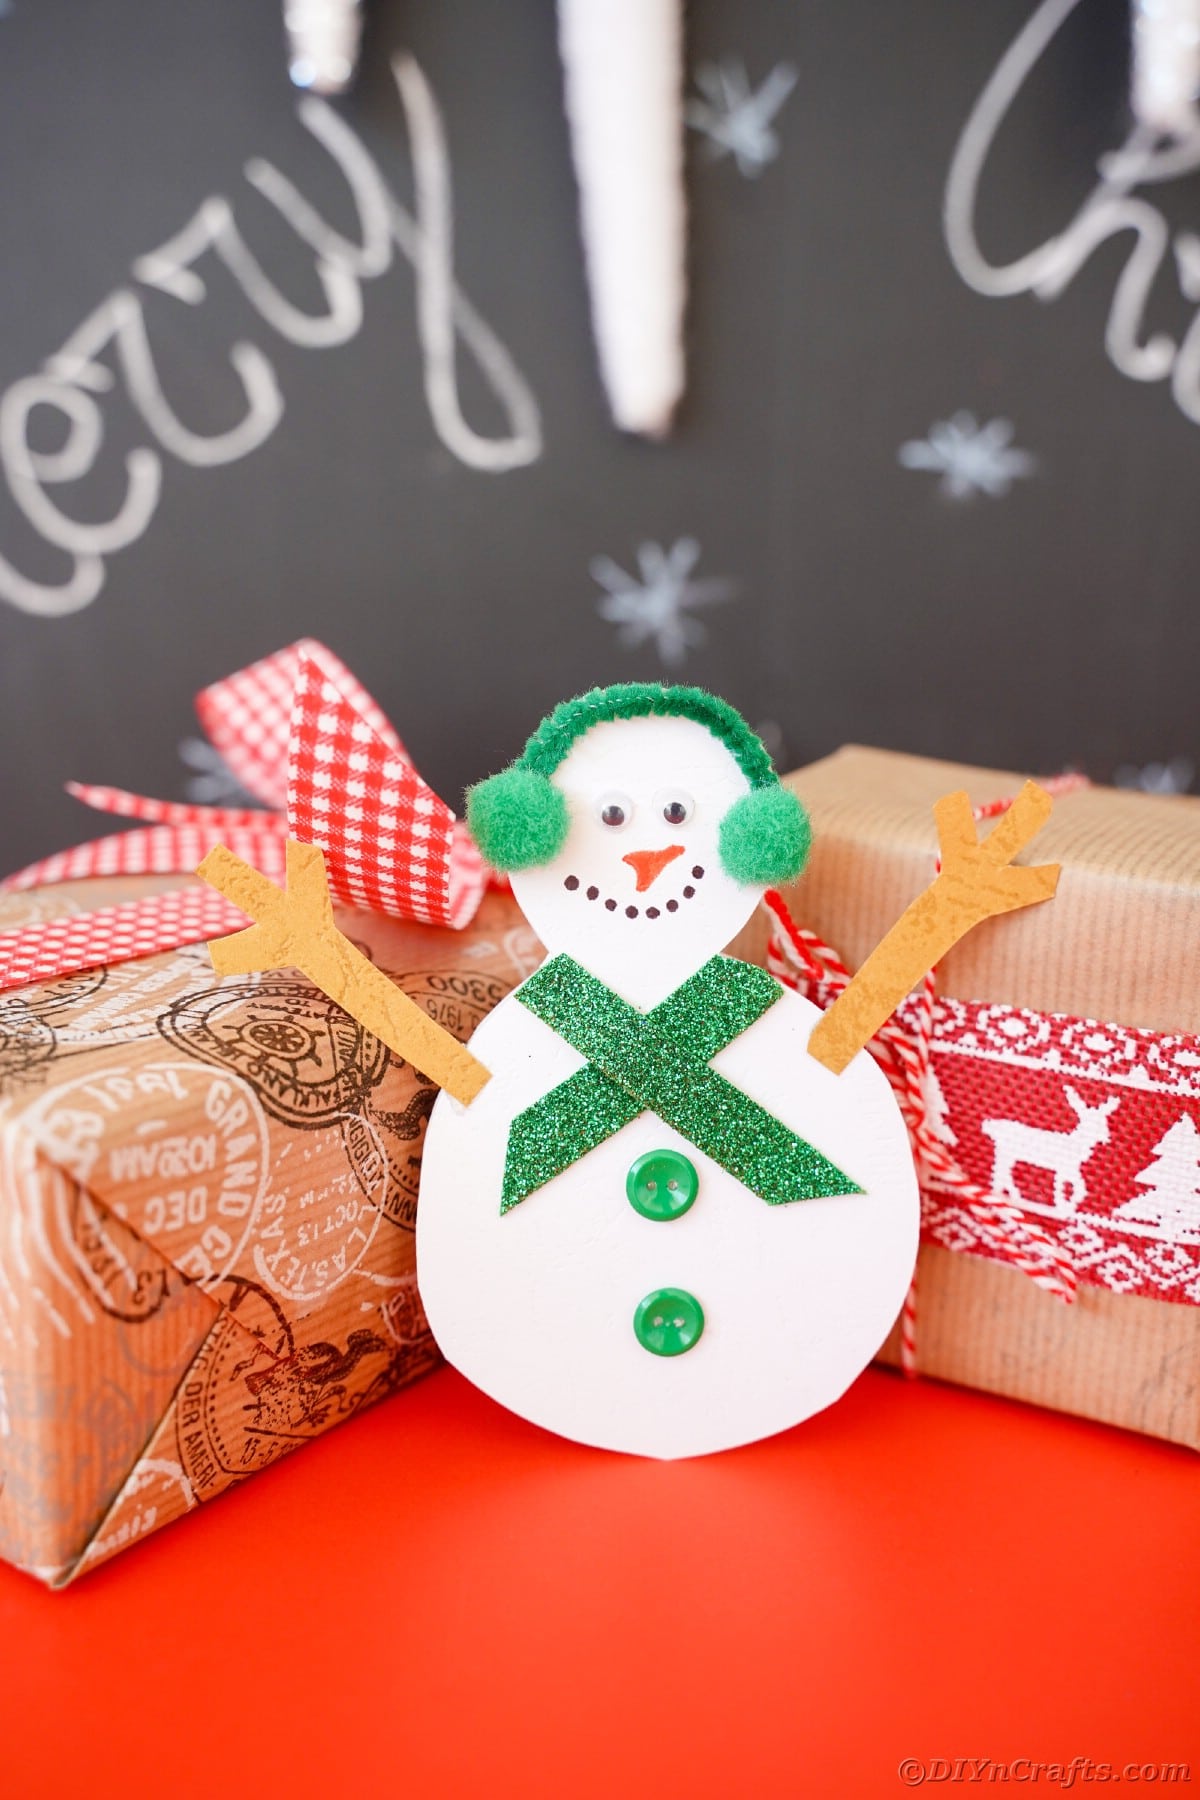 paper snowman with gifts by chalkboard